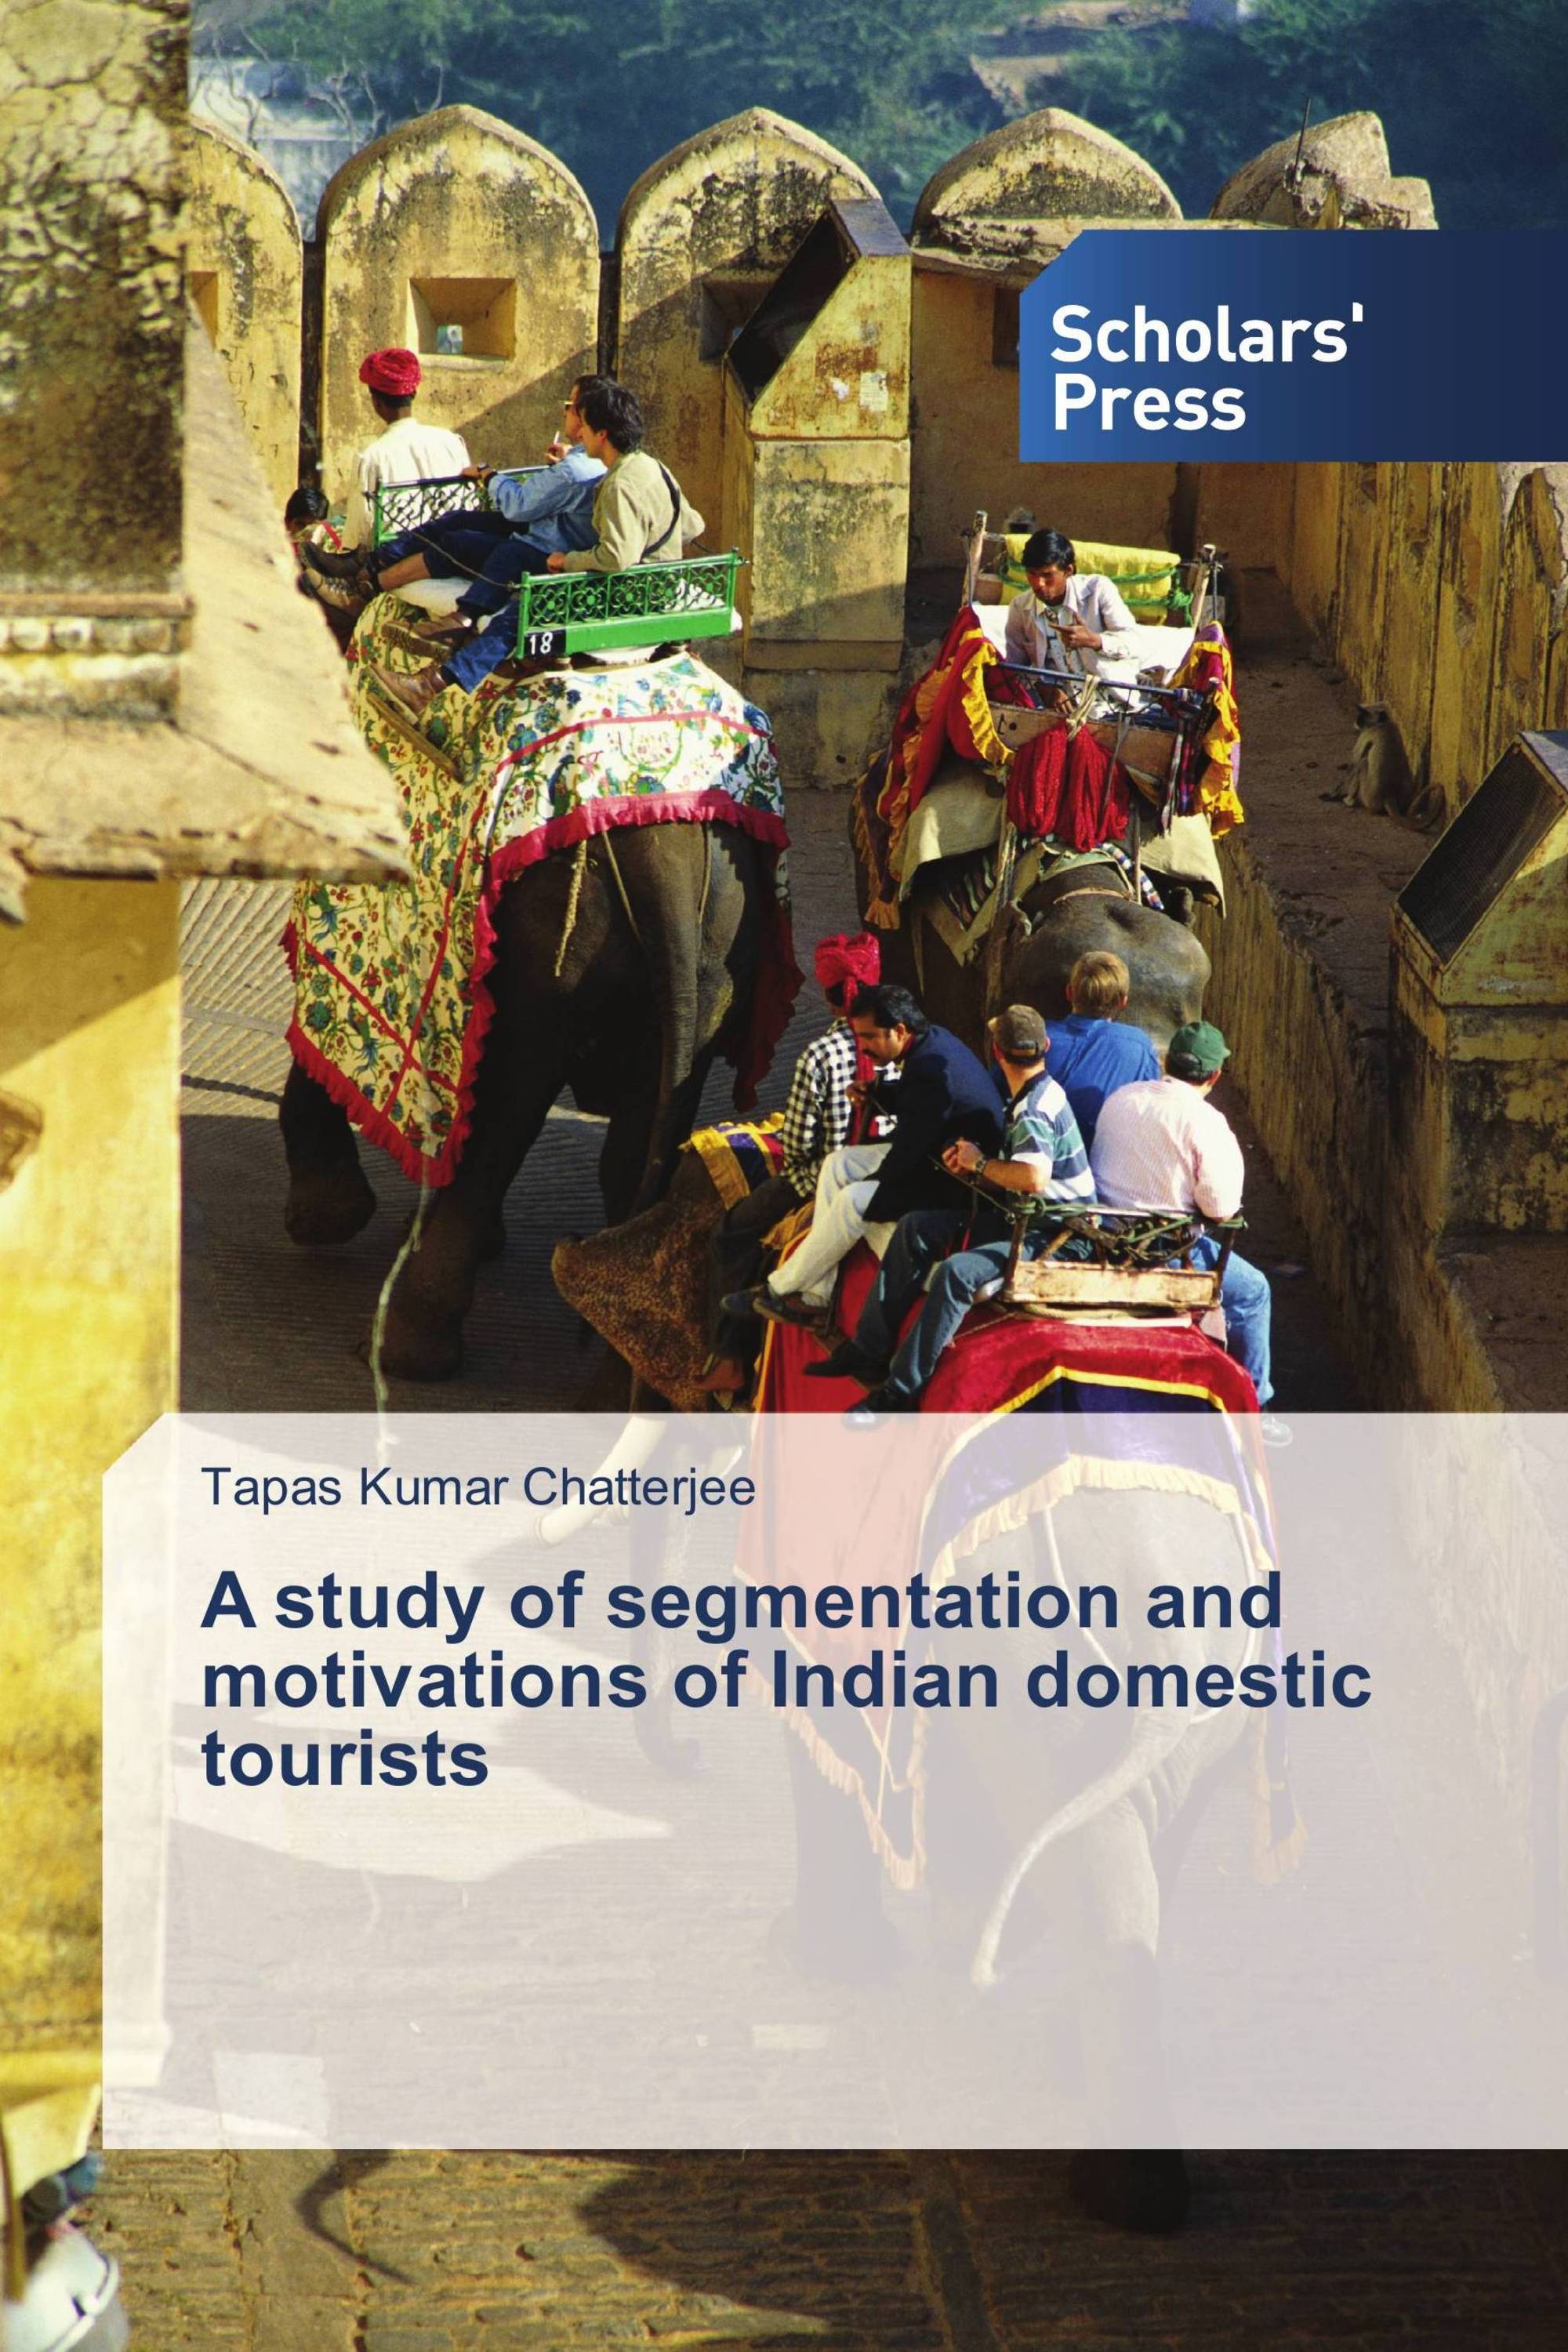 A study of segmentation and motivations of Indian domestic tourists